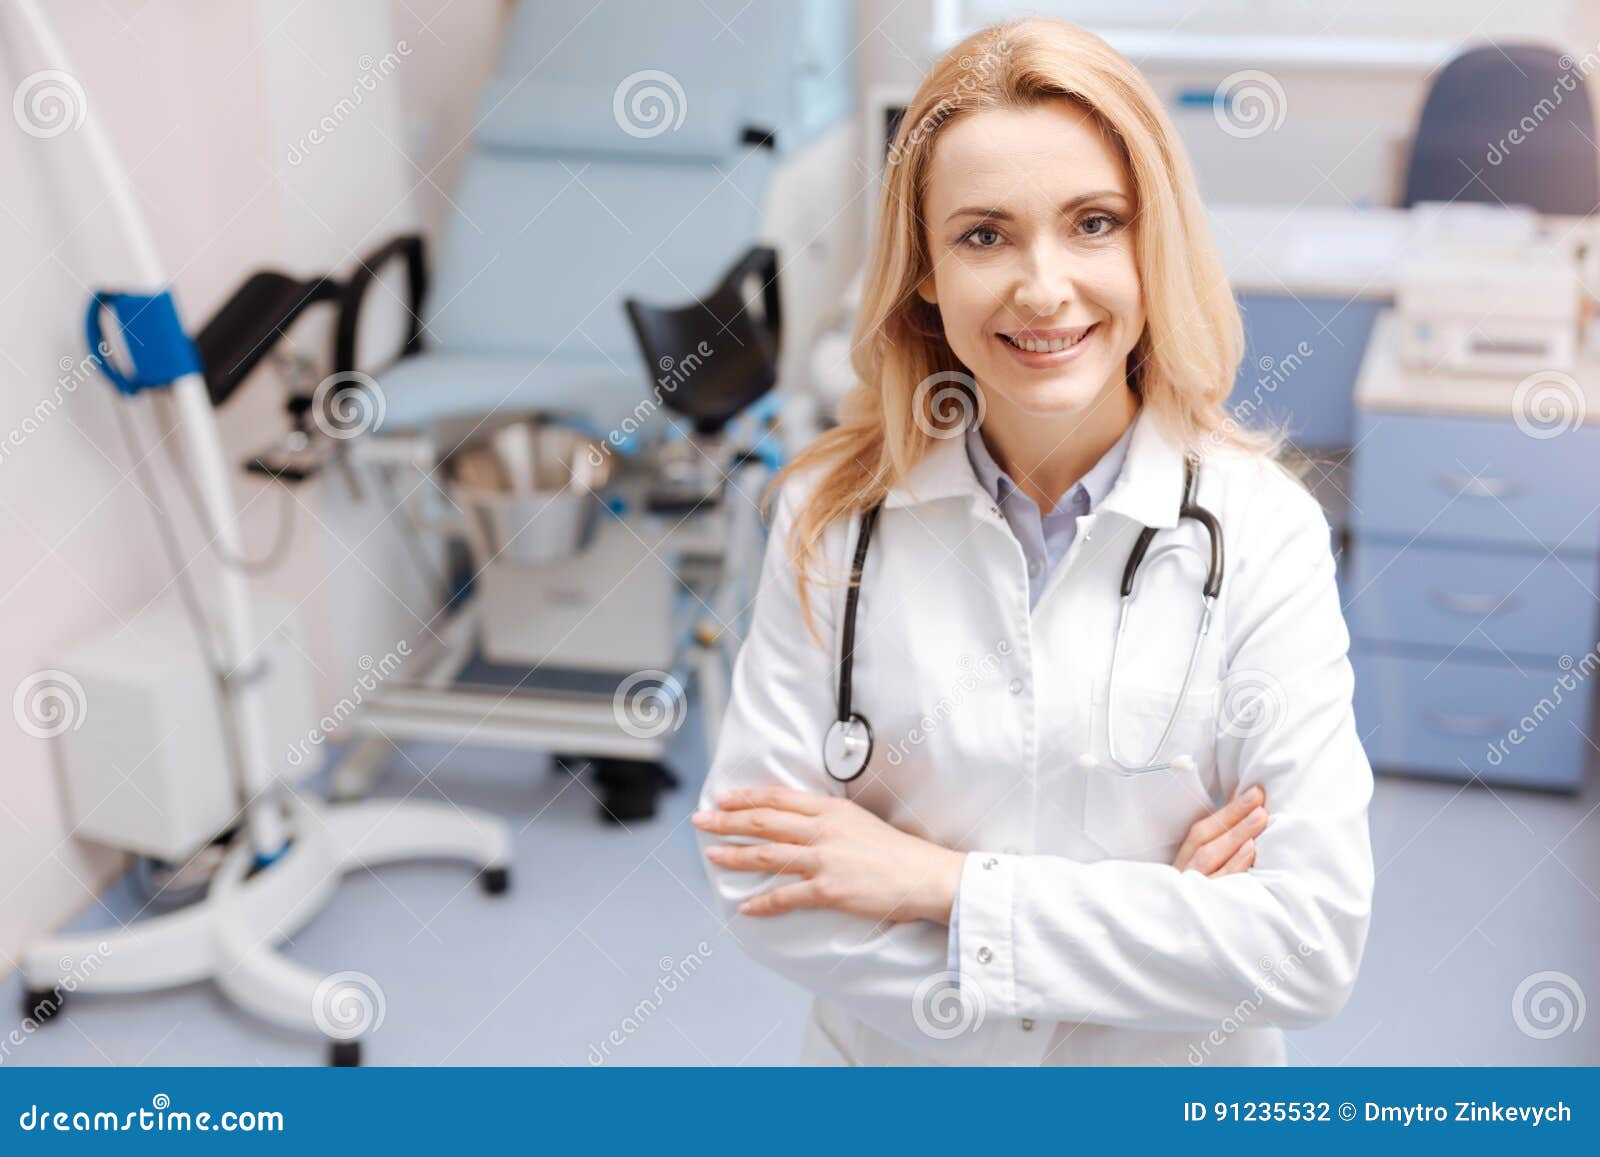 positive-mature-gynecologist-working-clinic-cheerful-hours-smiling-glad-confident-standing-gynecology-cabinet-91235532.jpg